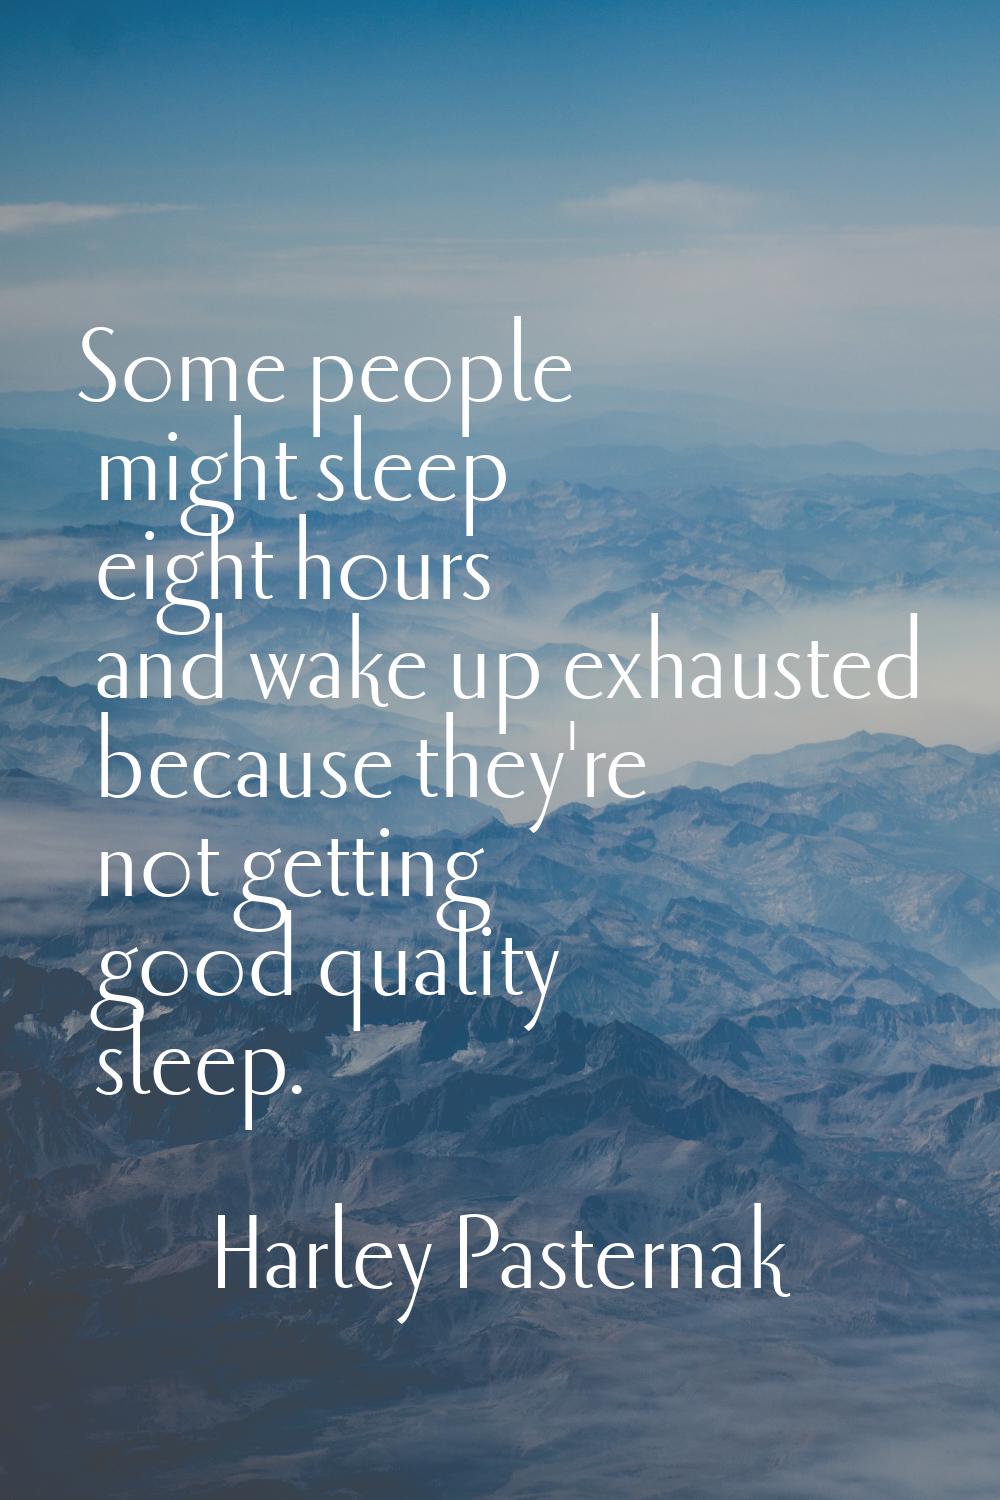 Some people might sleep eight hours and wake up exhausted because they're not getting good quality 